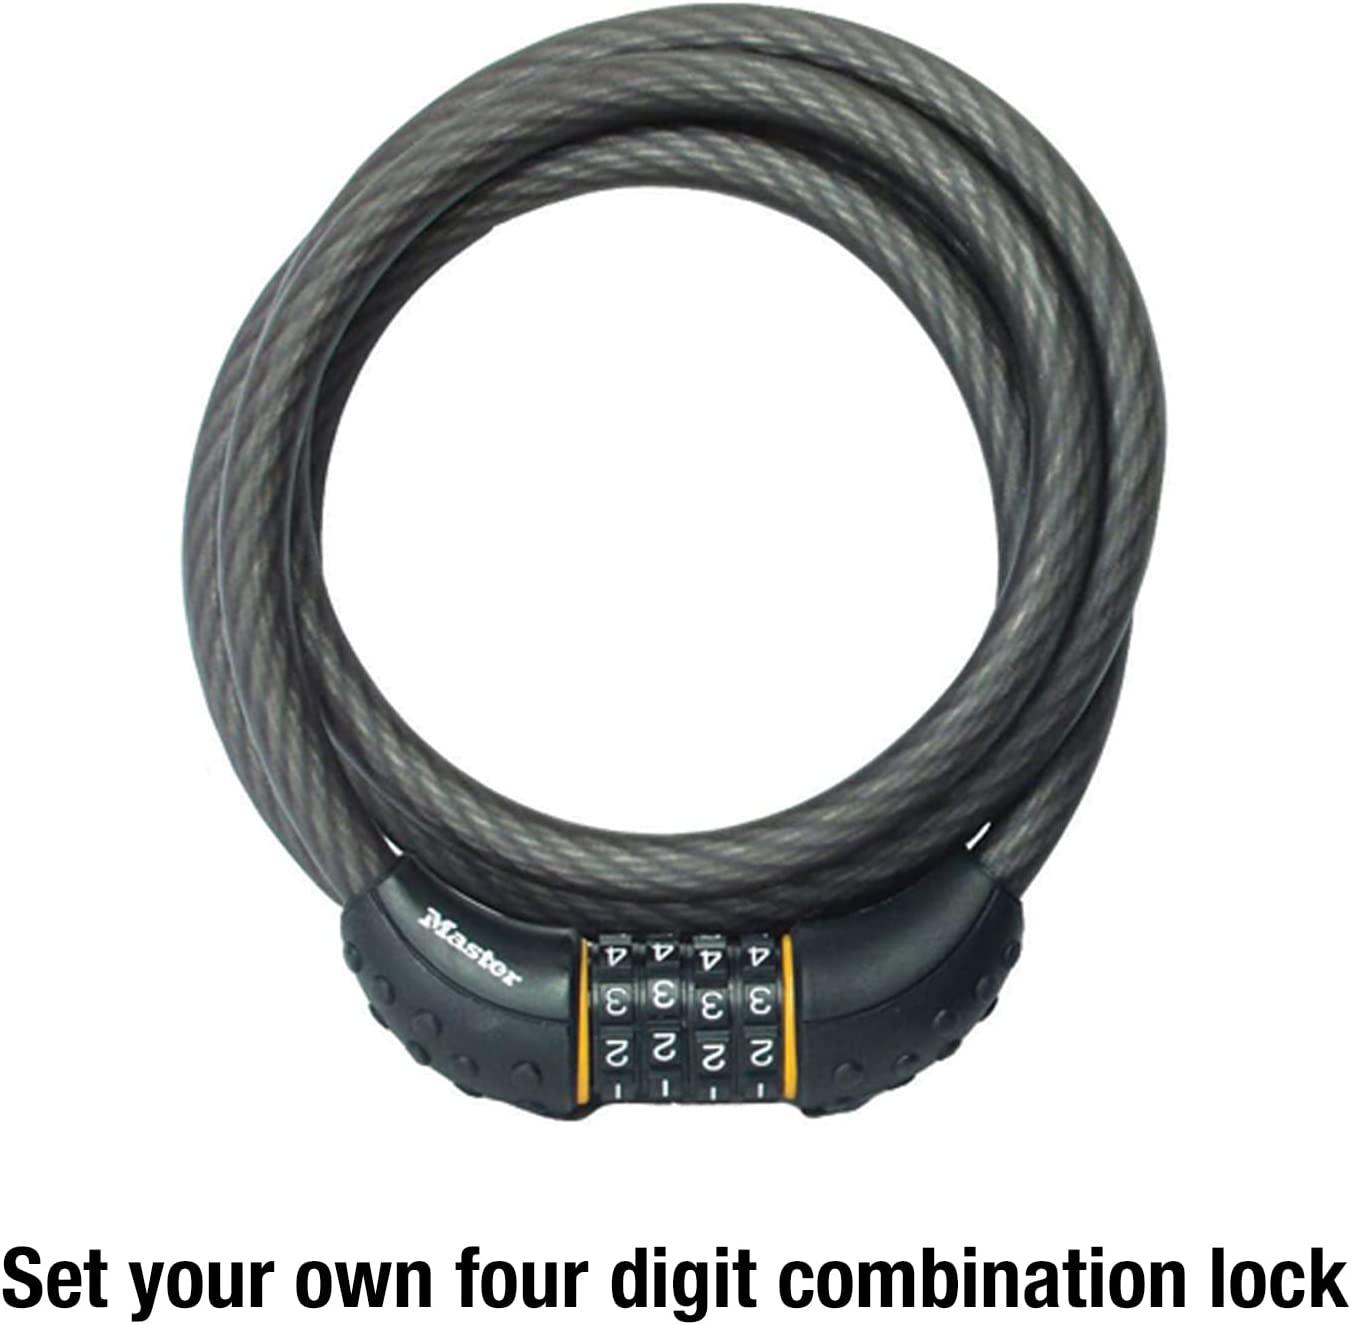 Master Lock© Cable Combination Lock, Set Your Own Combination Bike Lock, 6 ft. Long, 8122D , Black